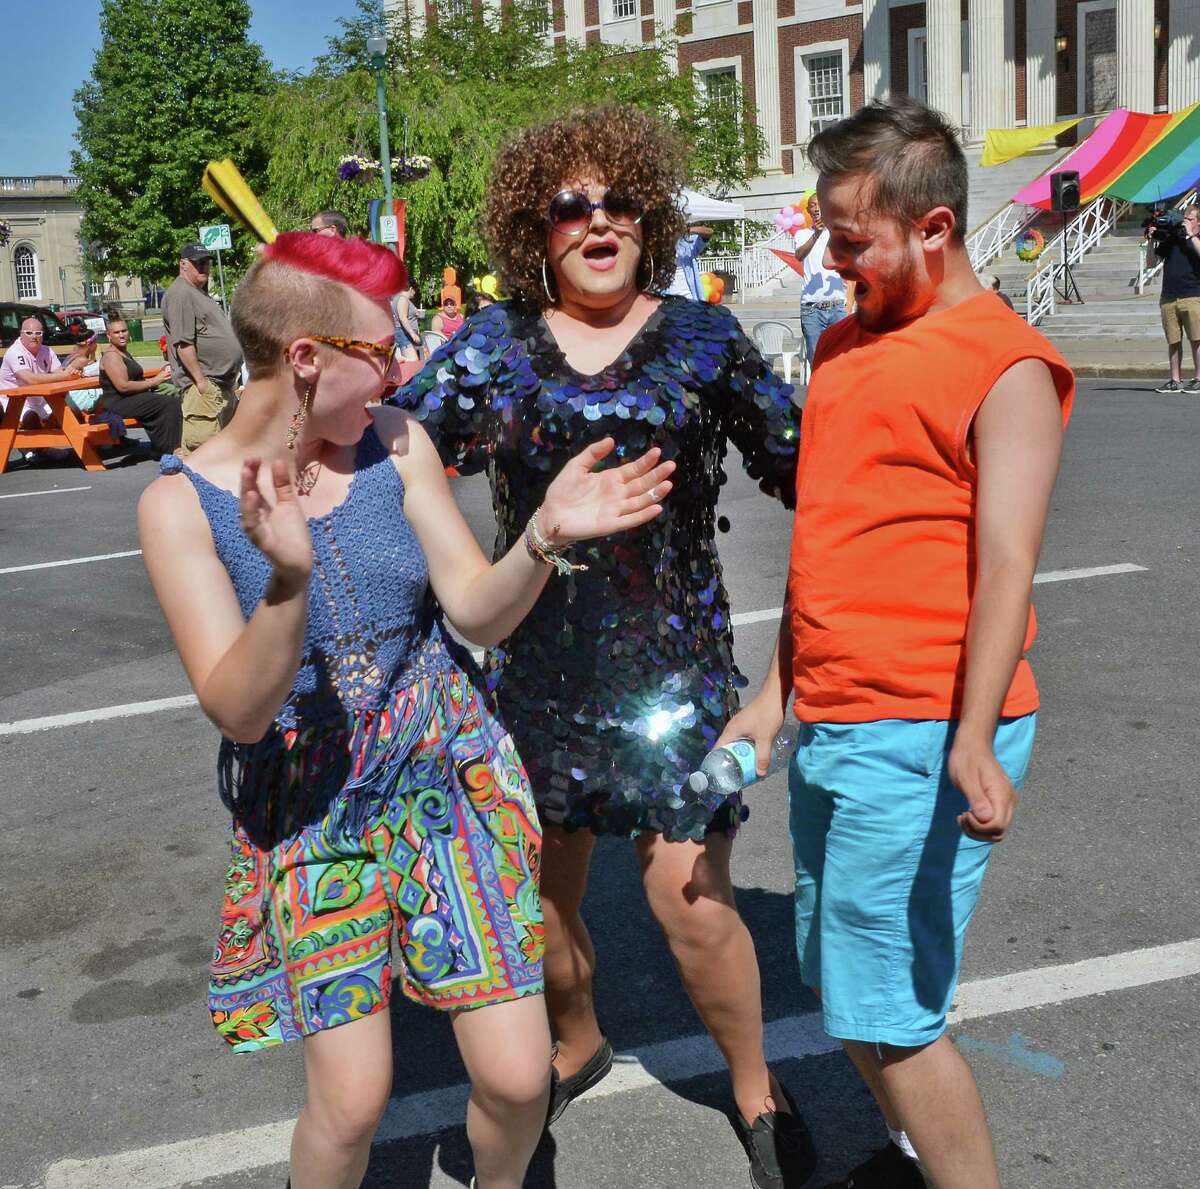 Emma Ward, left, and Victor Negron, dance with Scott Prividera, center, performing as "Dutchess Ivana" at the Schenectady Pride annual Gay Pride festival outside City Hall Saturday June 18, 2016 in Schenectady, NY.(John Carl D'Annibale / Times Union)